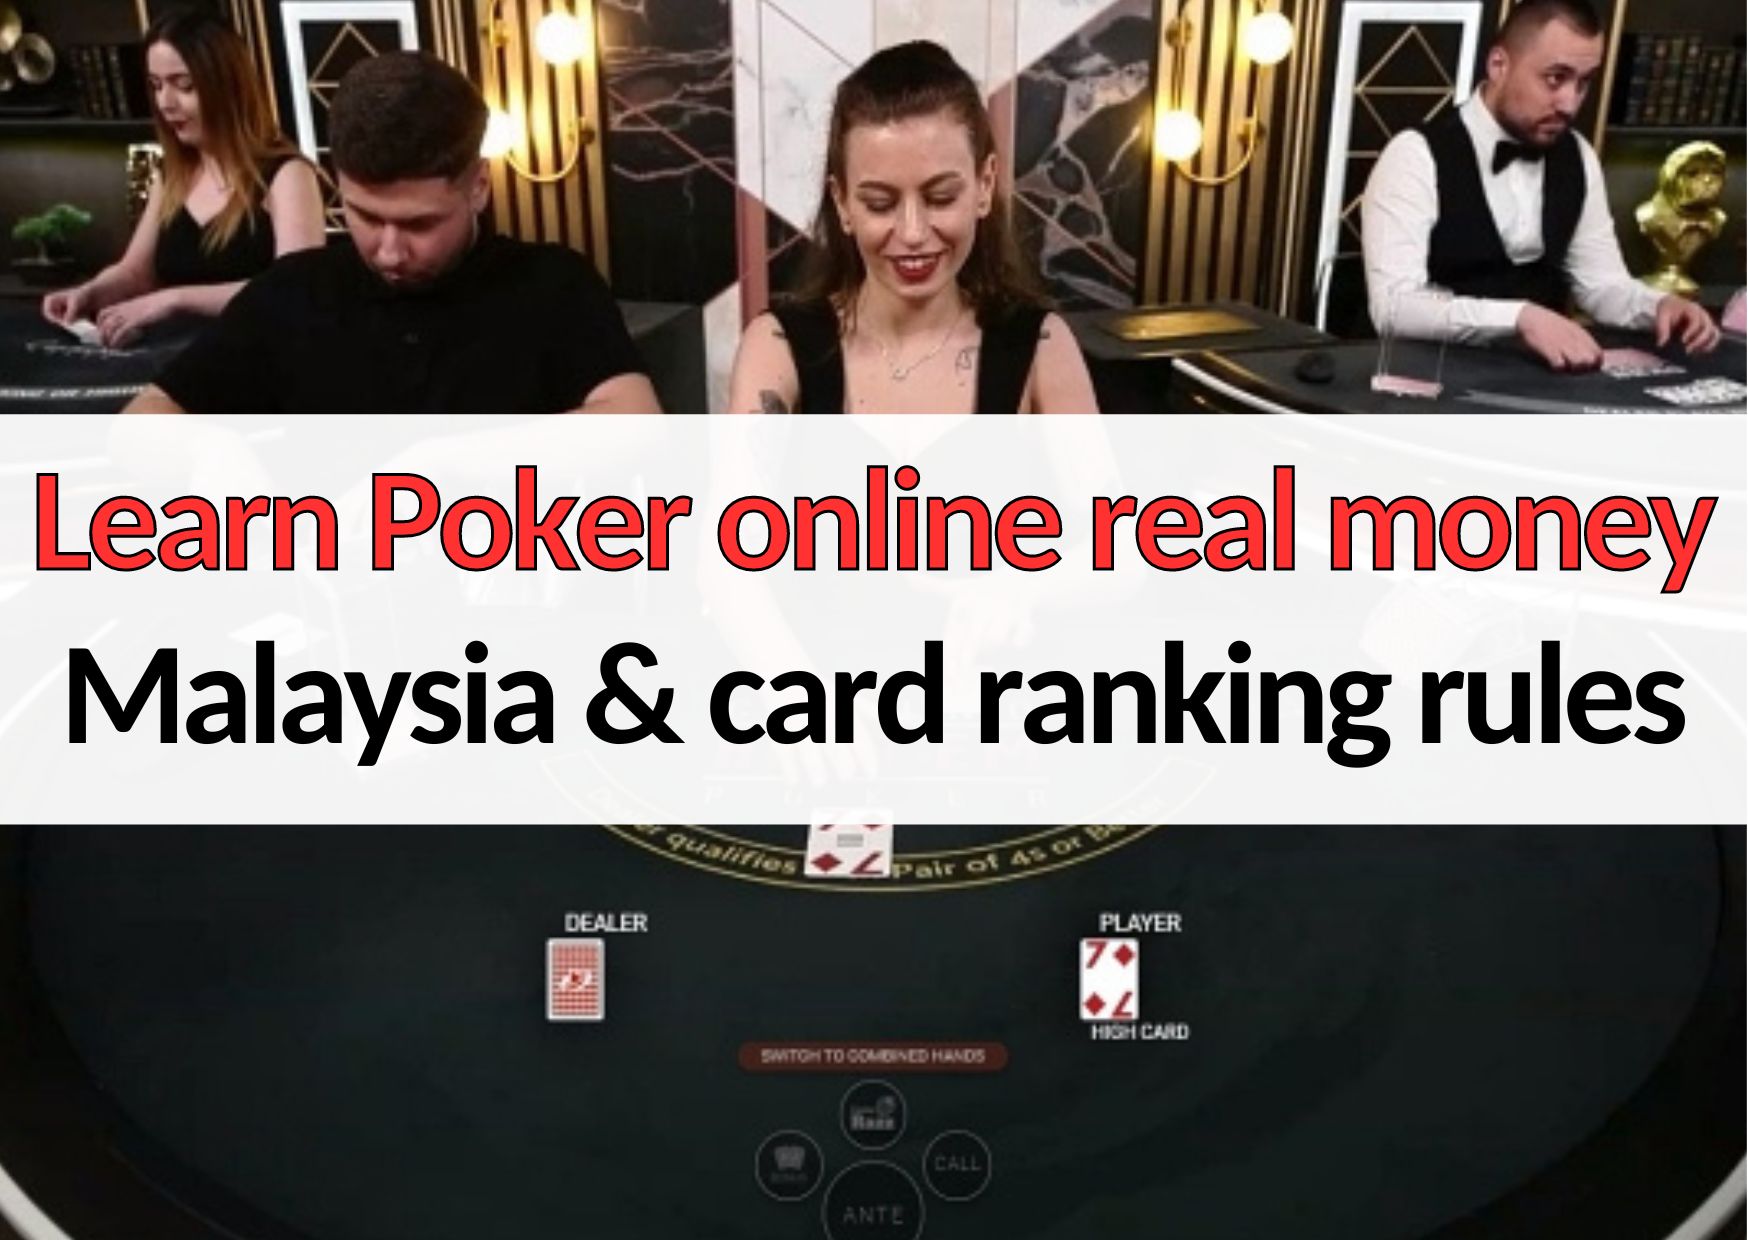 poker online real money malaysia card ranking rules explained